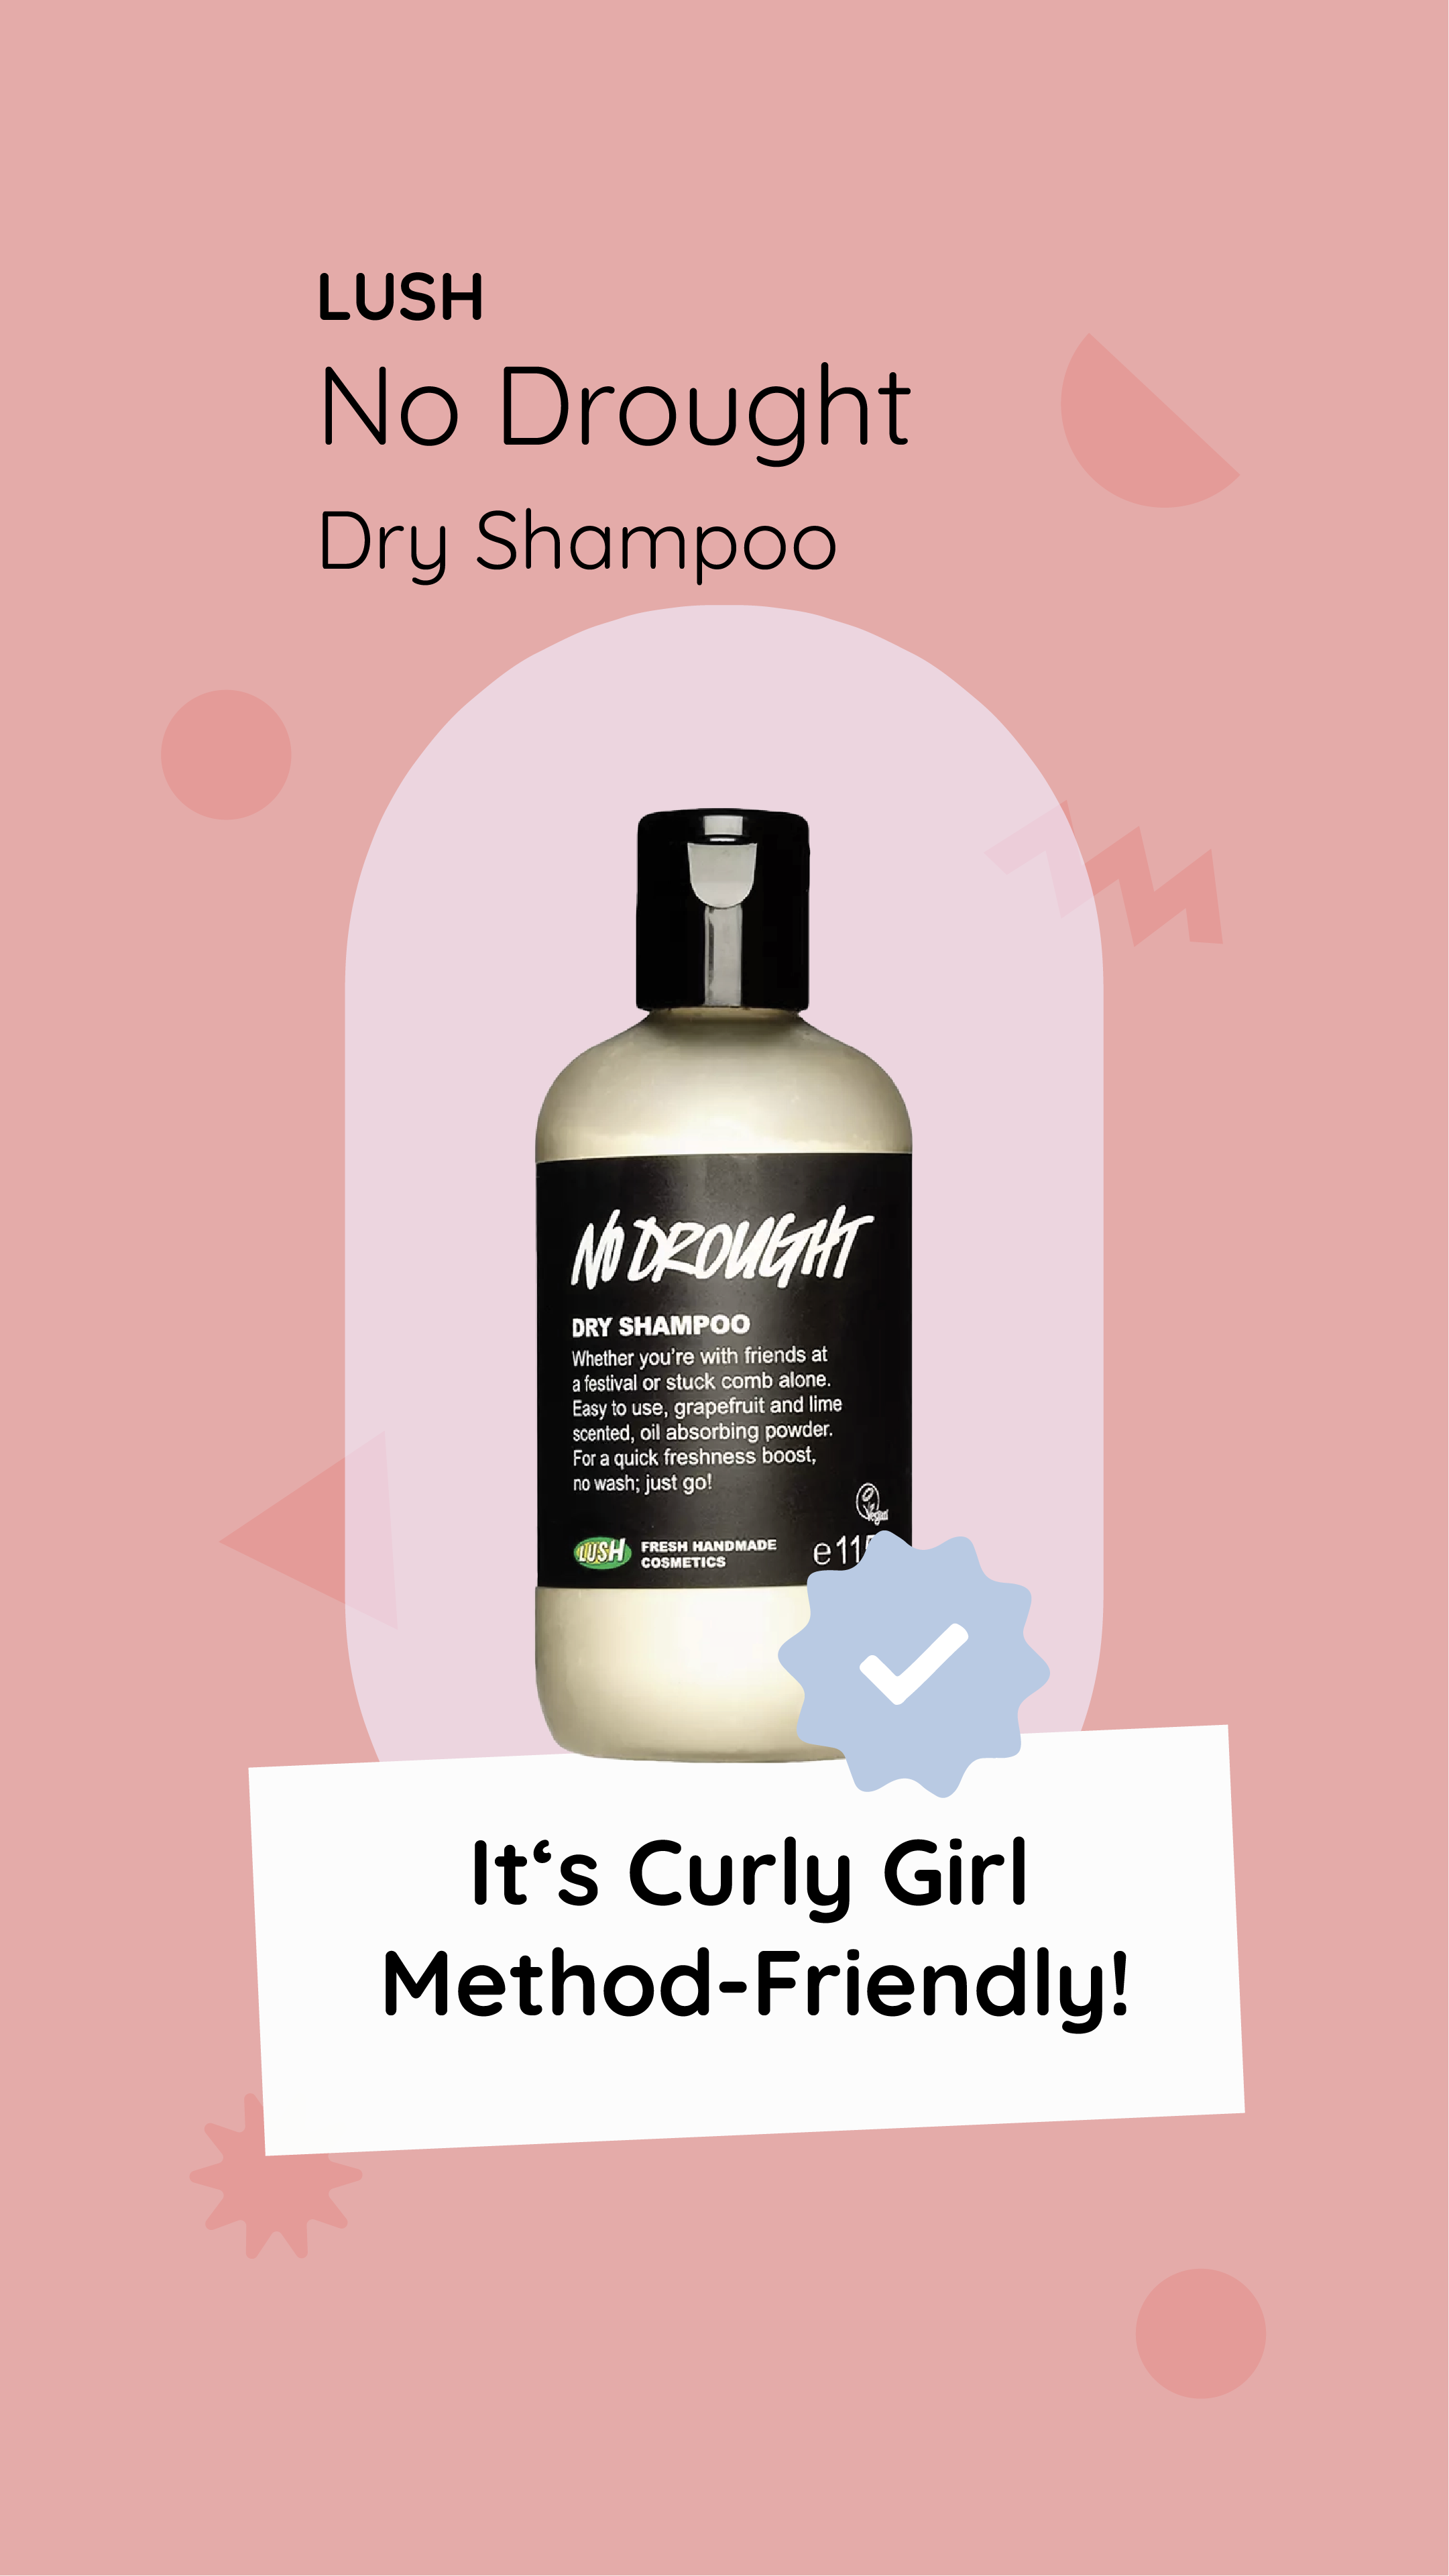 Is Dry Shampoo Lush No Drought Curly Girl Method Friendly?